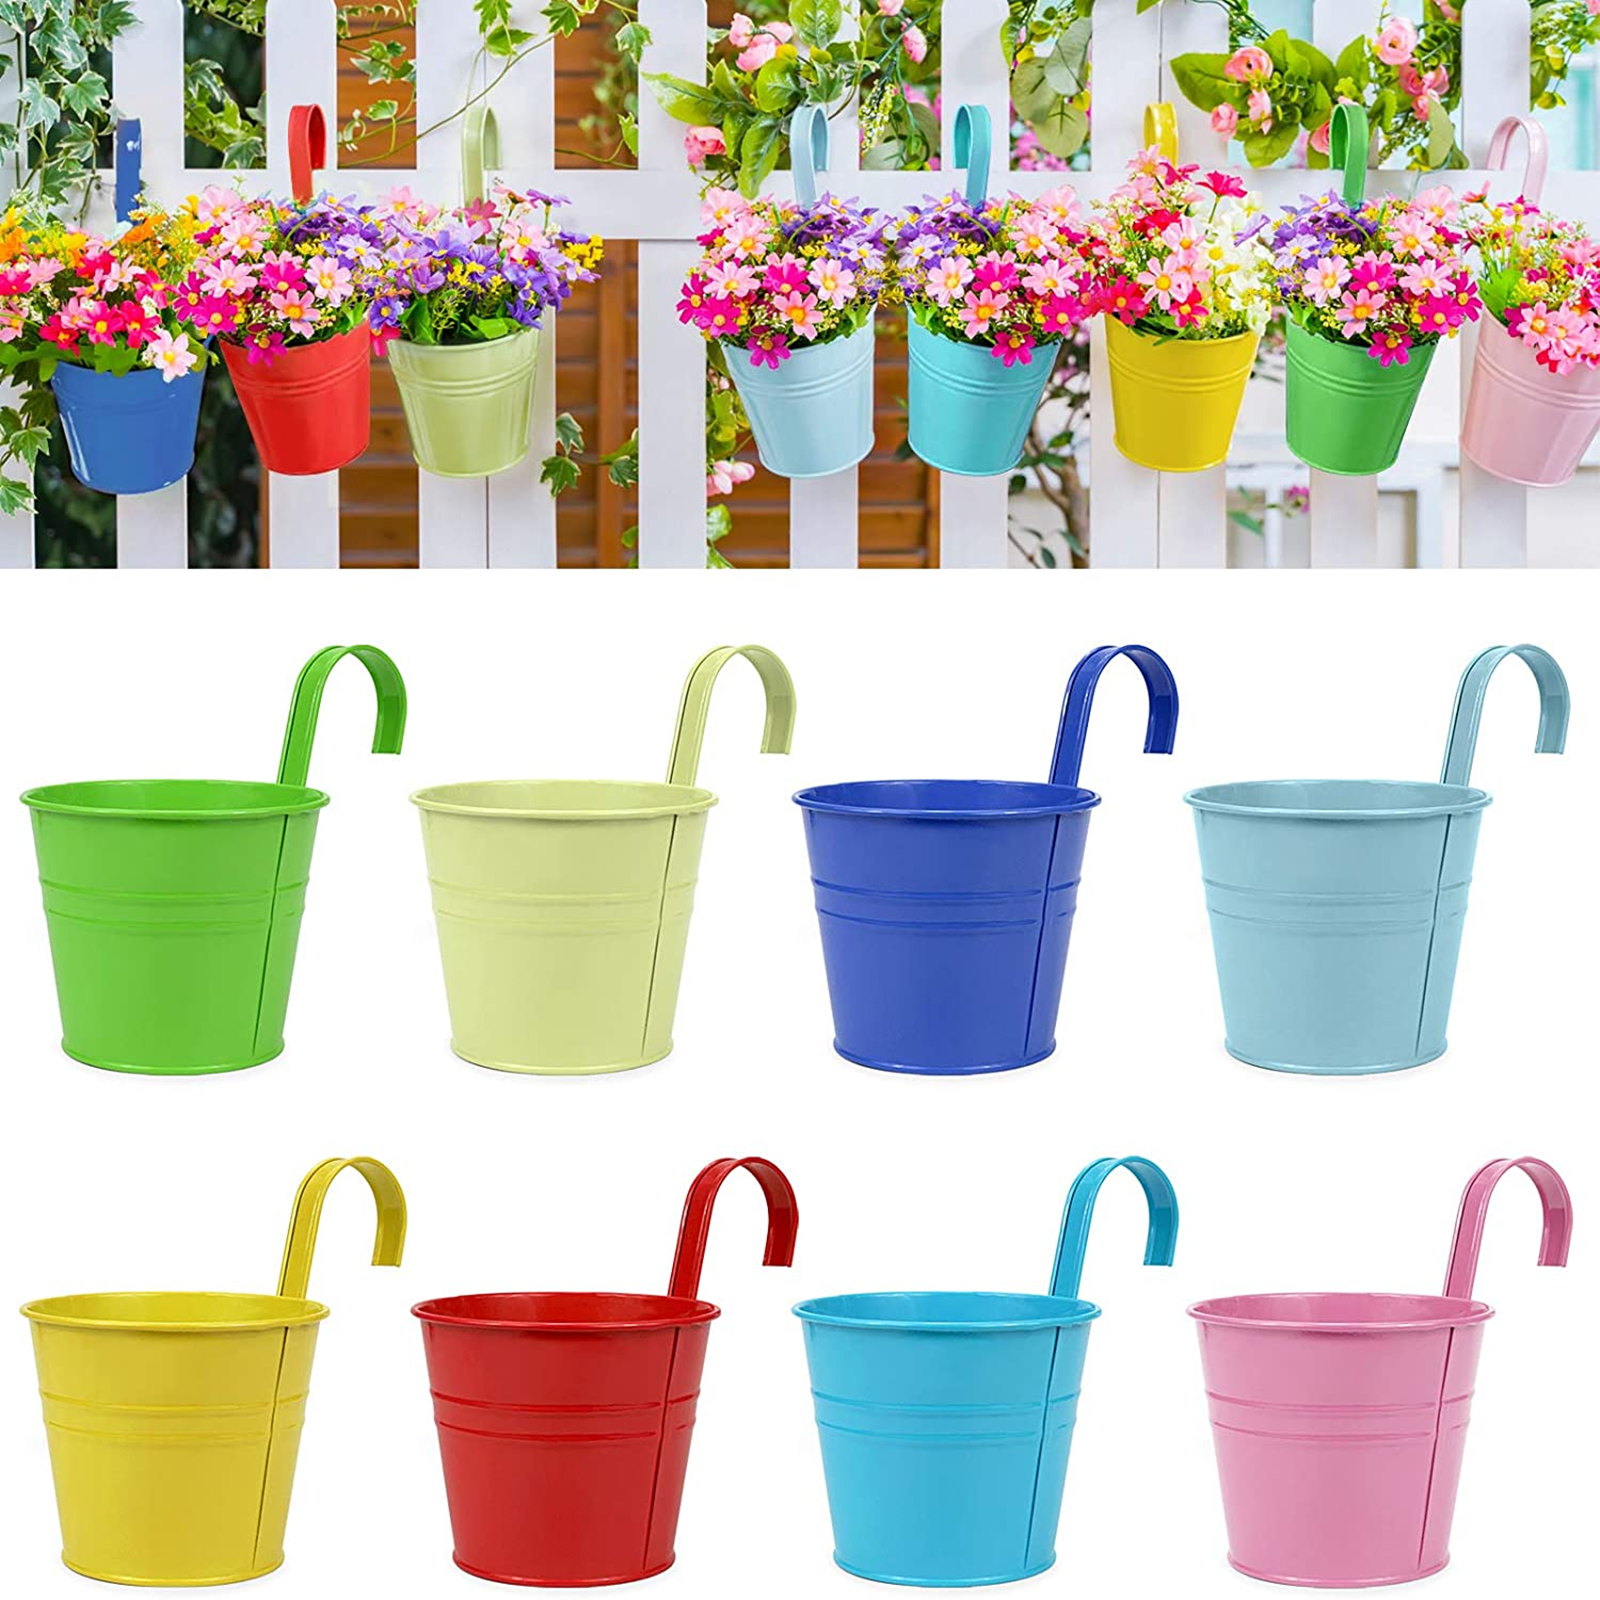 Rikyo 4Pcs Hanging Cup Holder,Rolling Cart Accessories,Plant  Containers,Hanging Flower Pots,Space Saver,Storage Bucket,Make Up Pencil  Holder